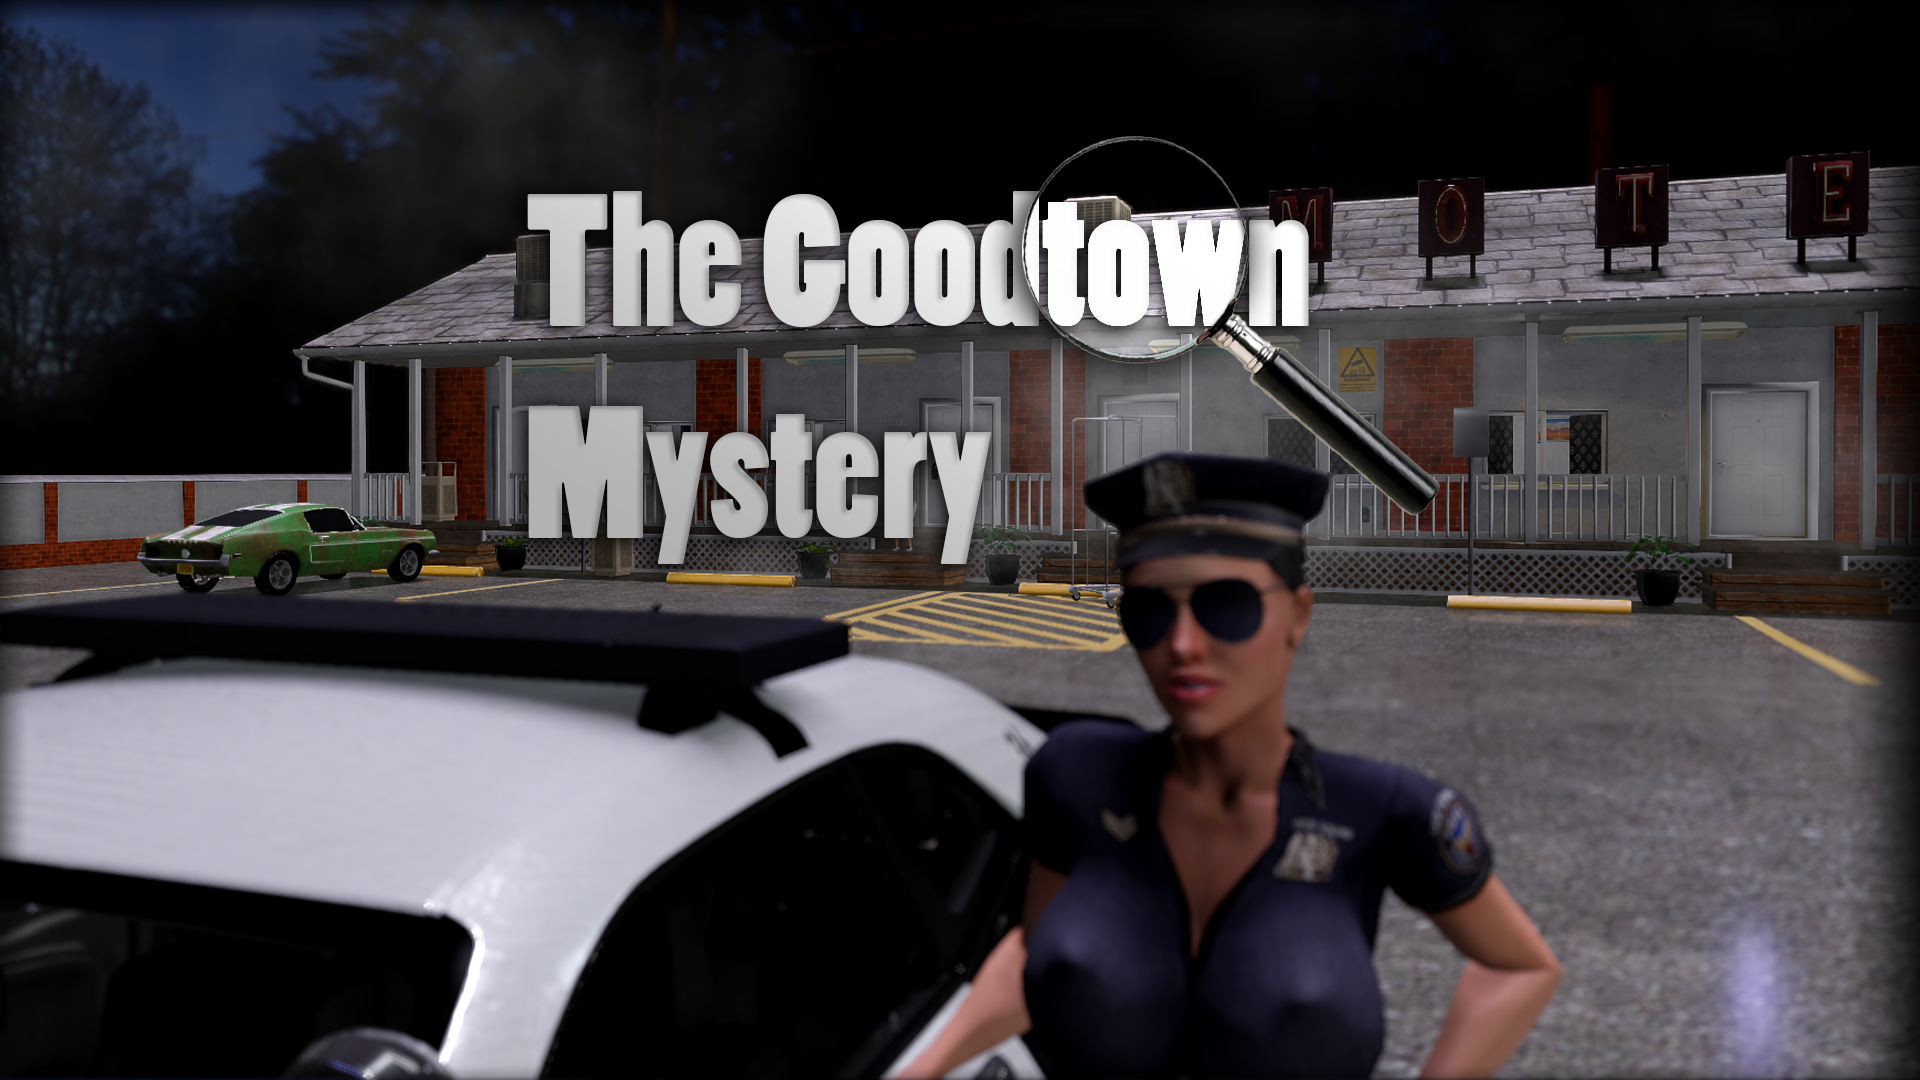 The Goodtown Mystery